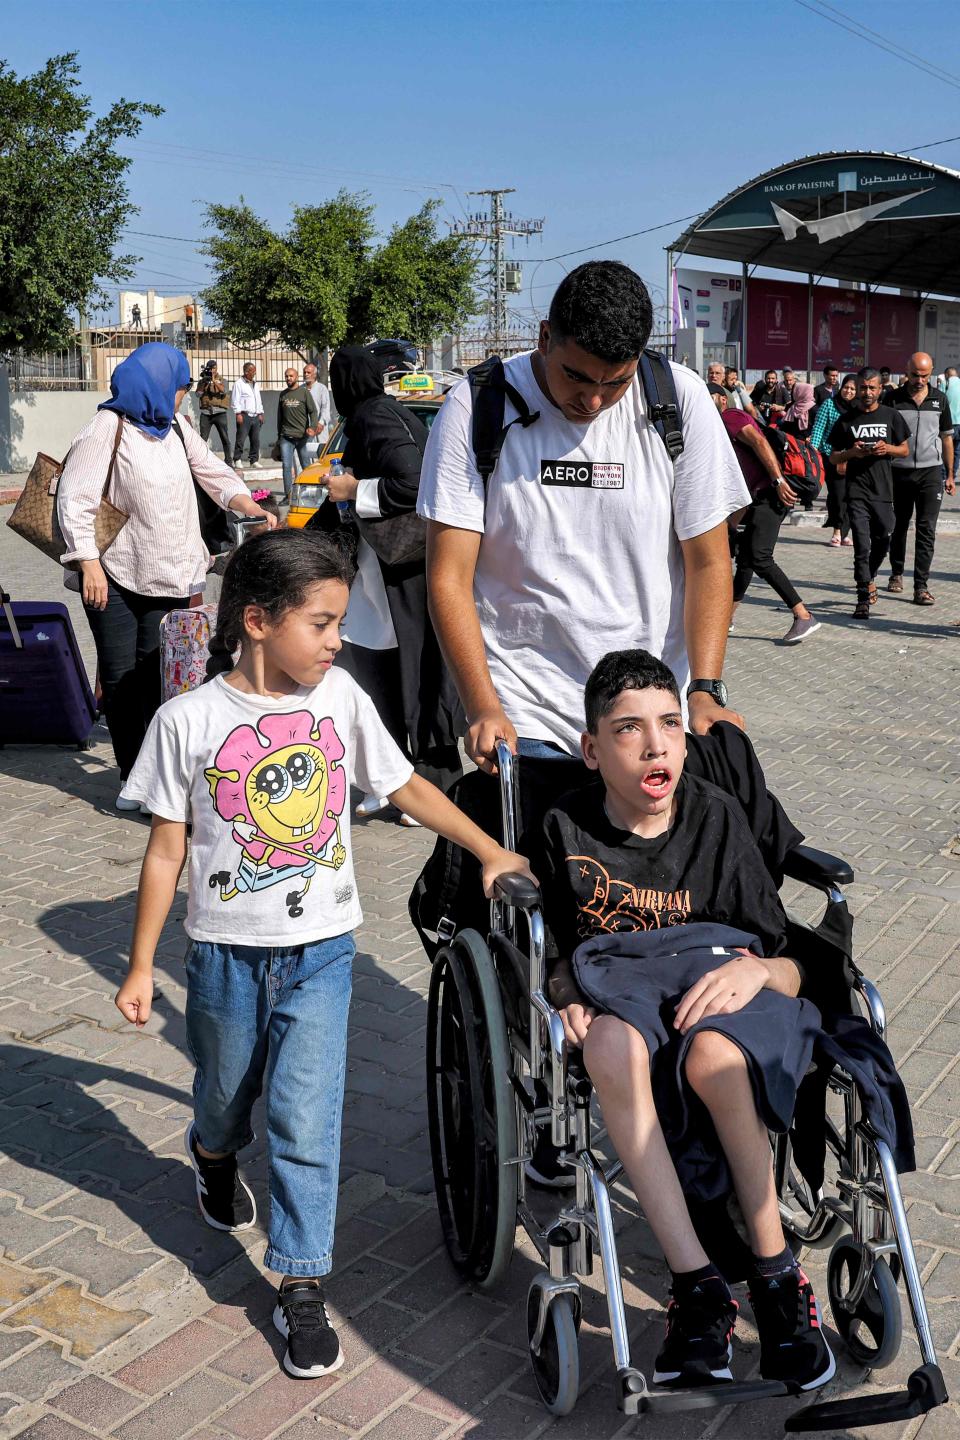 A man pushes a child on a wheelchair as people enter the Rafah border crossing (AFP via Getty Images)